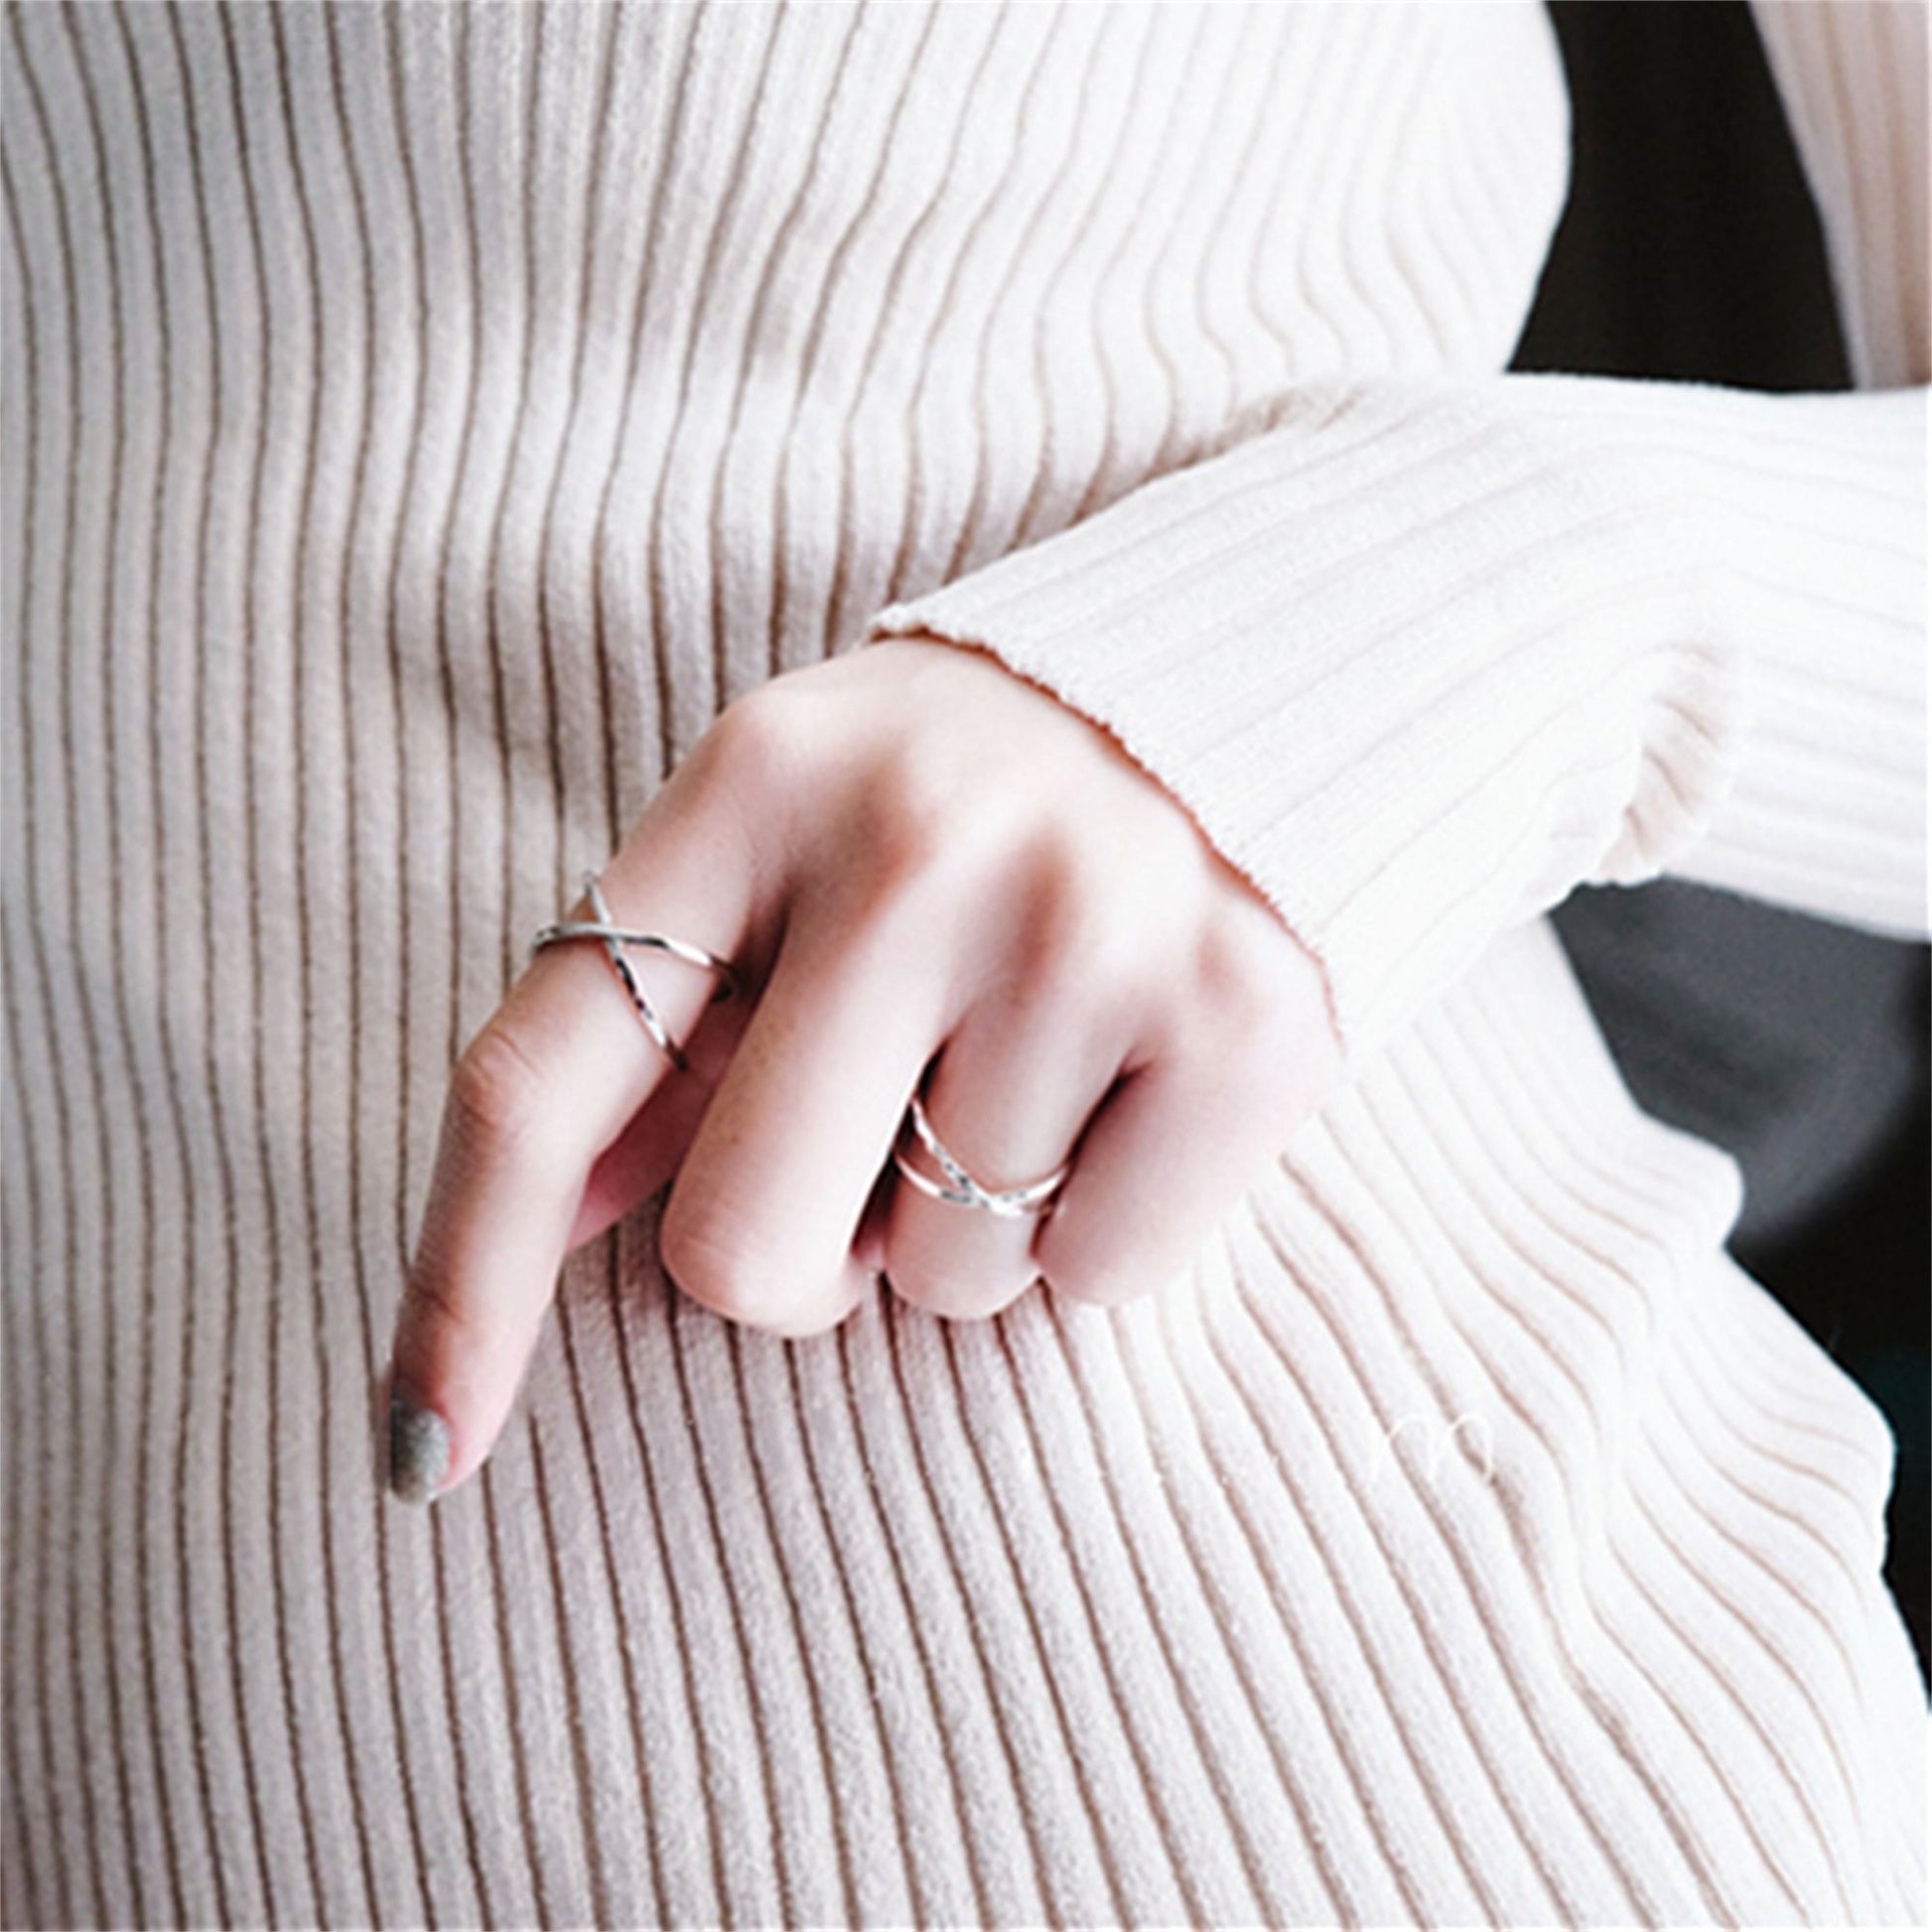 Rhodium-plated Sterling Silver Criss Cross Infinity Love Knot Open End Ring - sugarkittenlondon